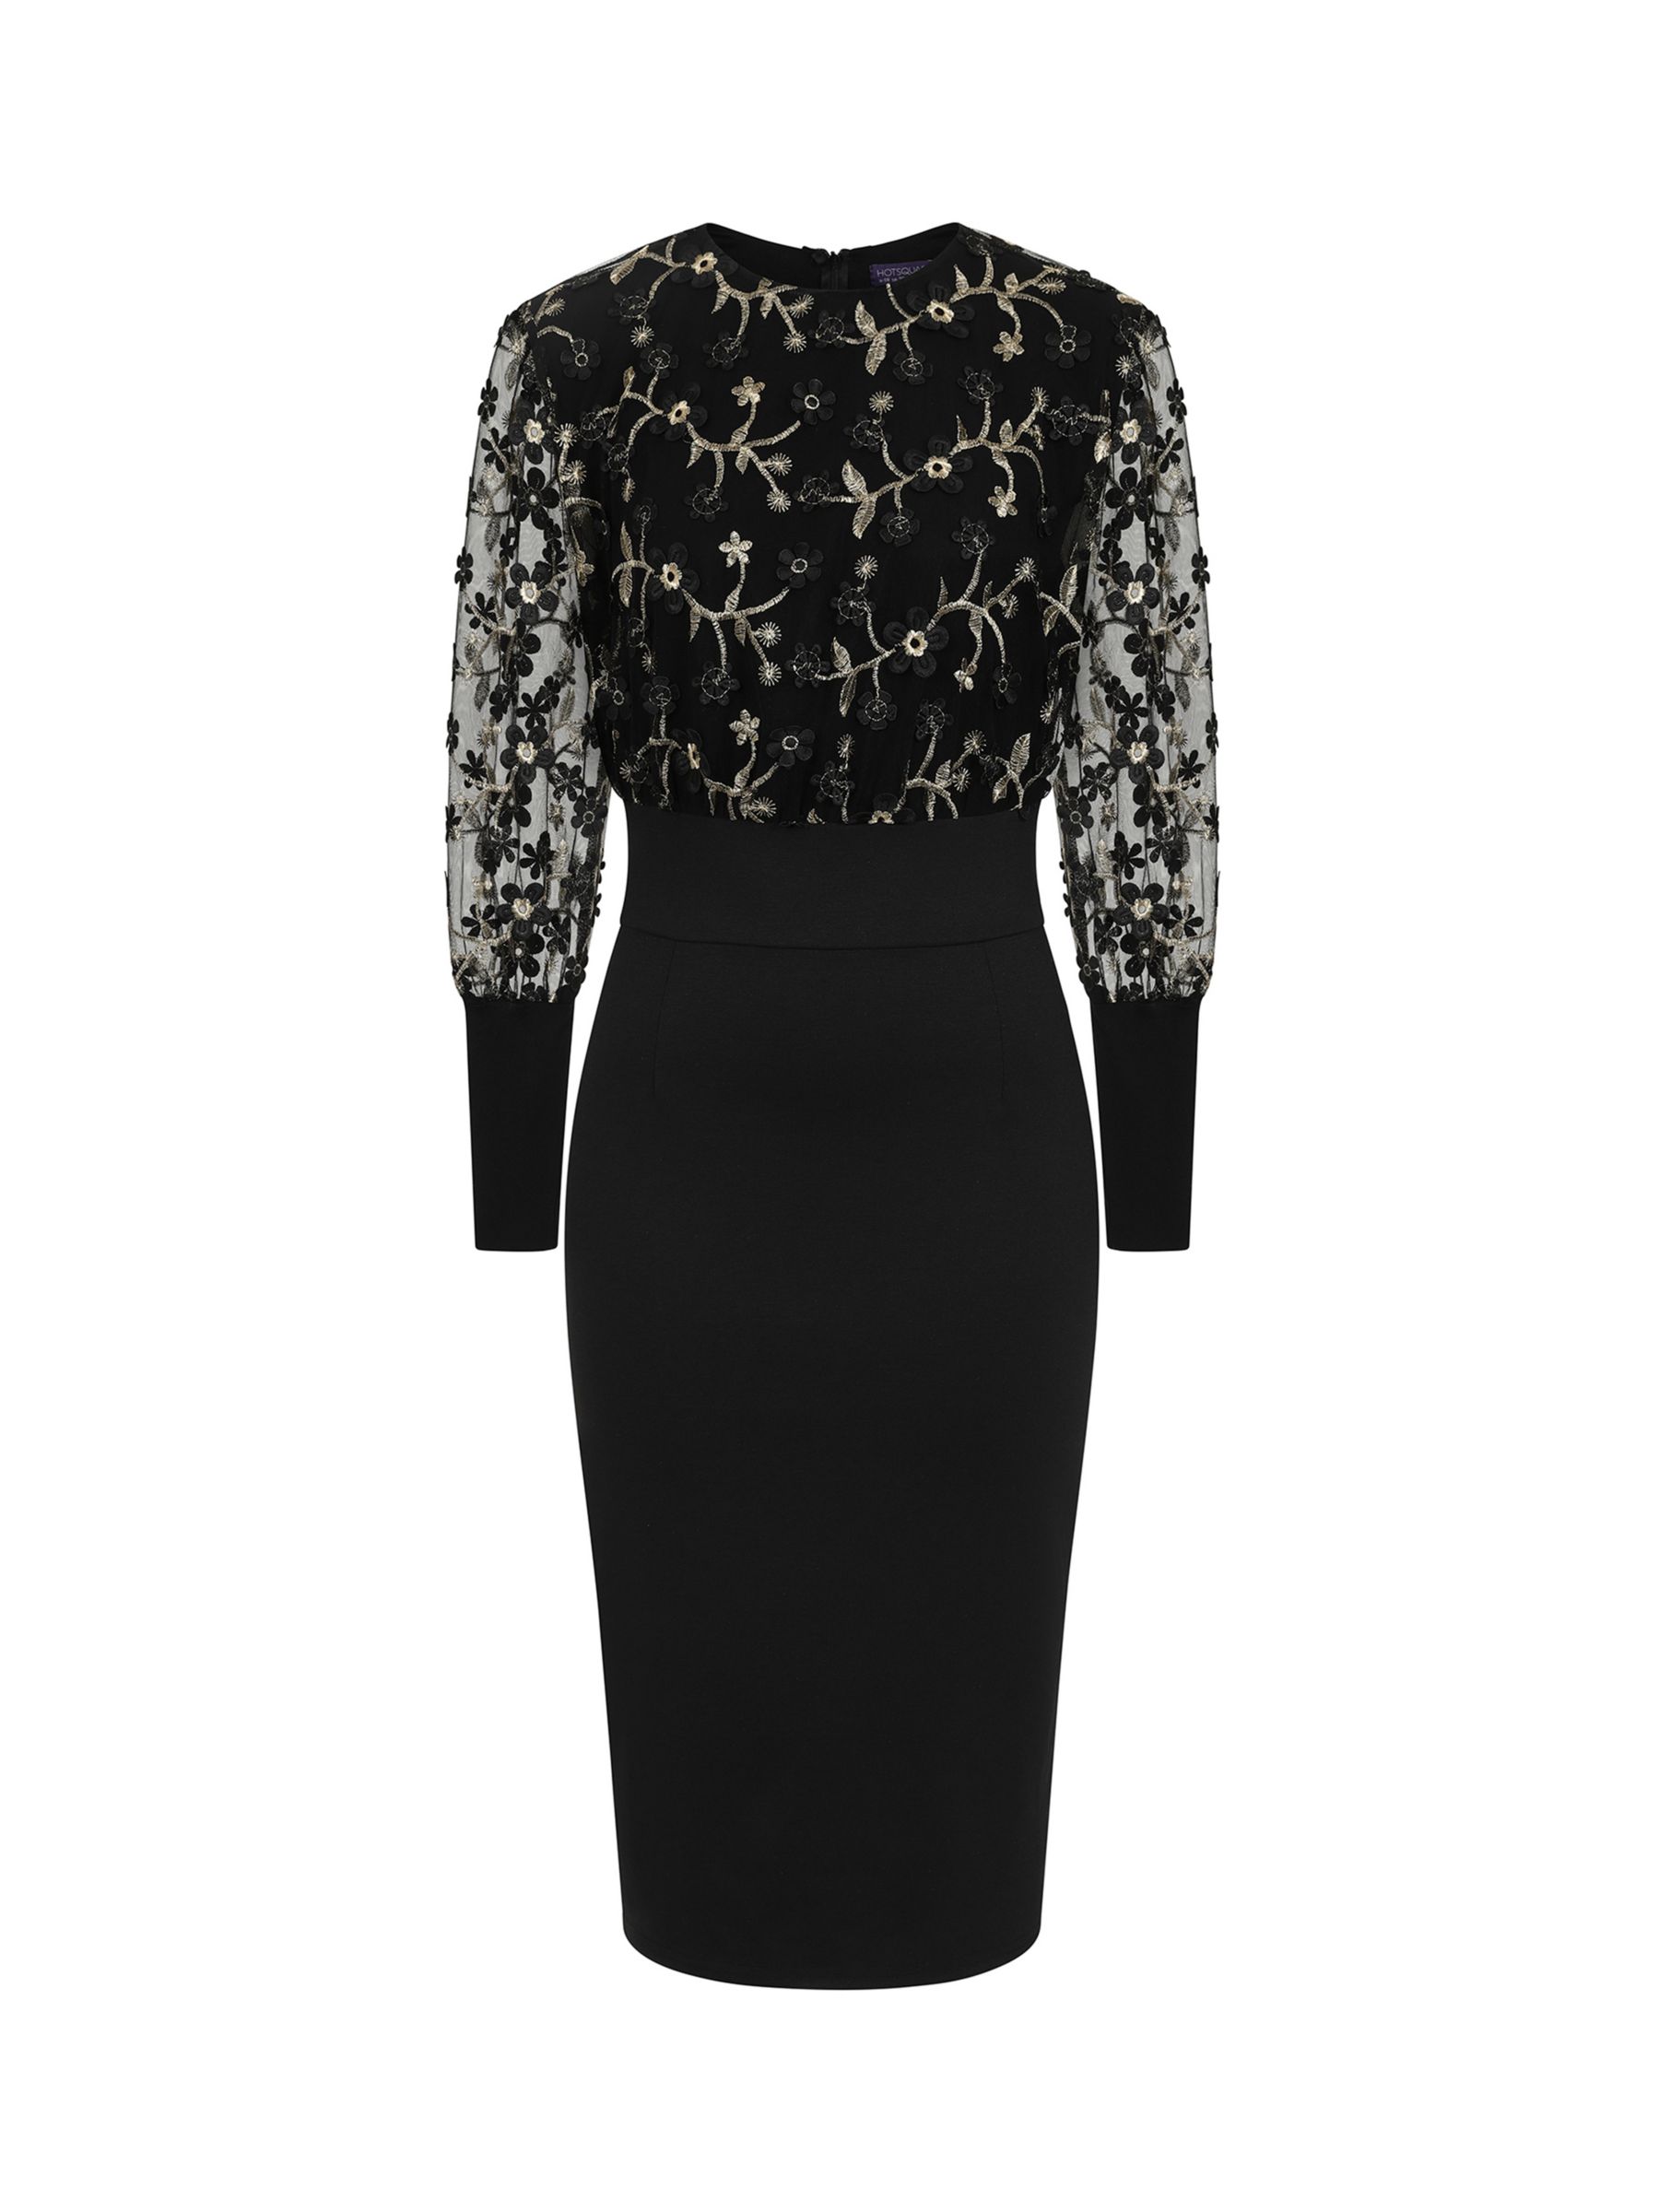 Buy HotSquash Embroidered Bodice Pencil Dress, Black Online at johnlewis.com